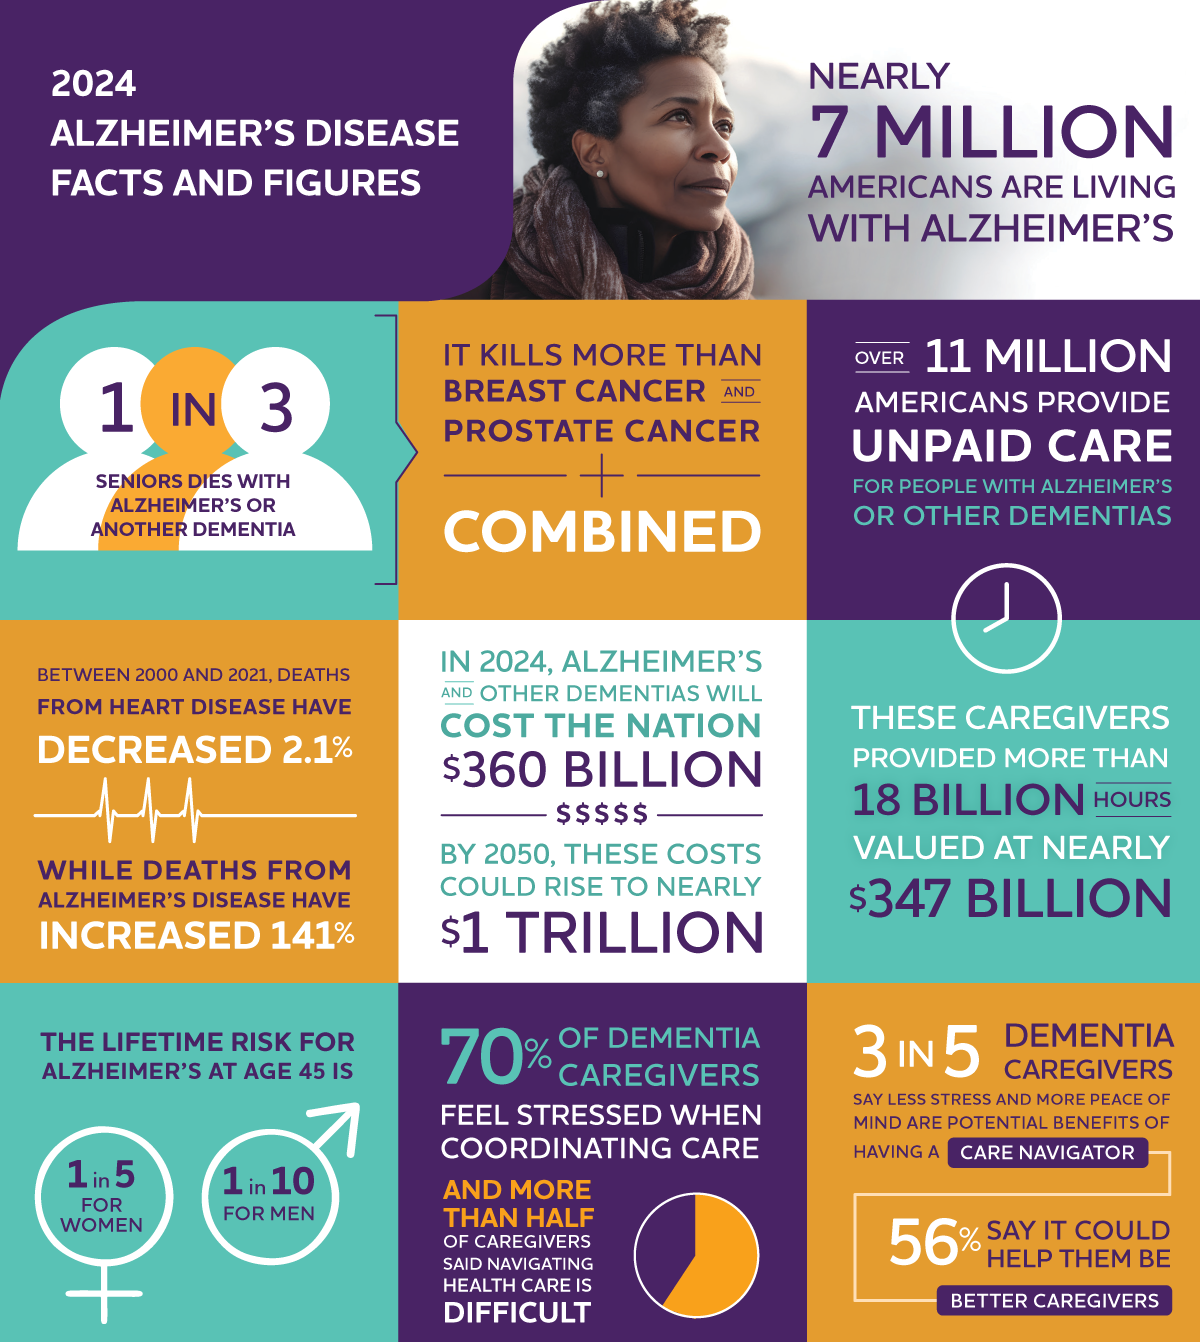 NEW: 2024 Alzheimer's Disease Facts and Figures